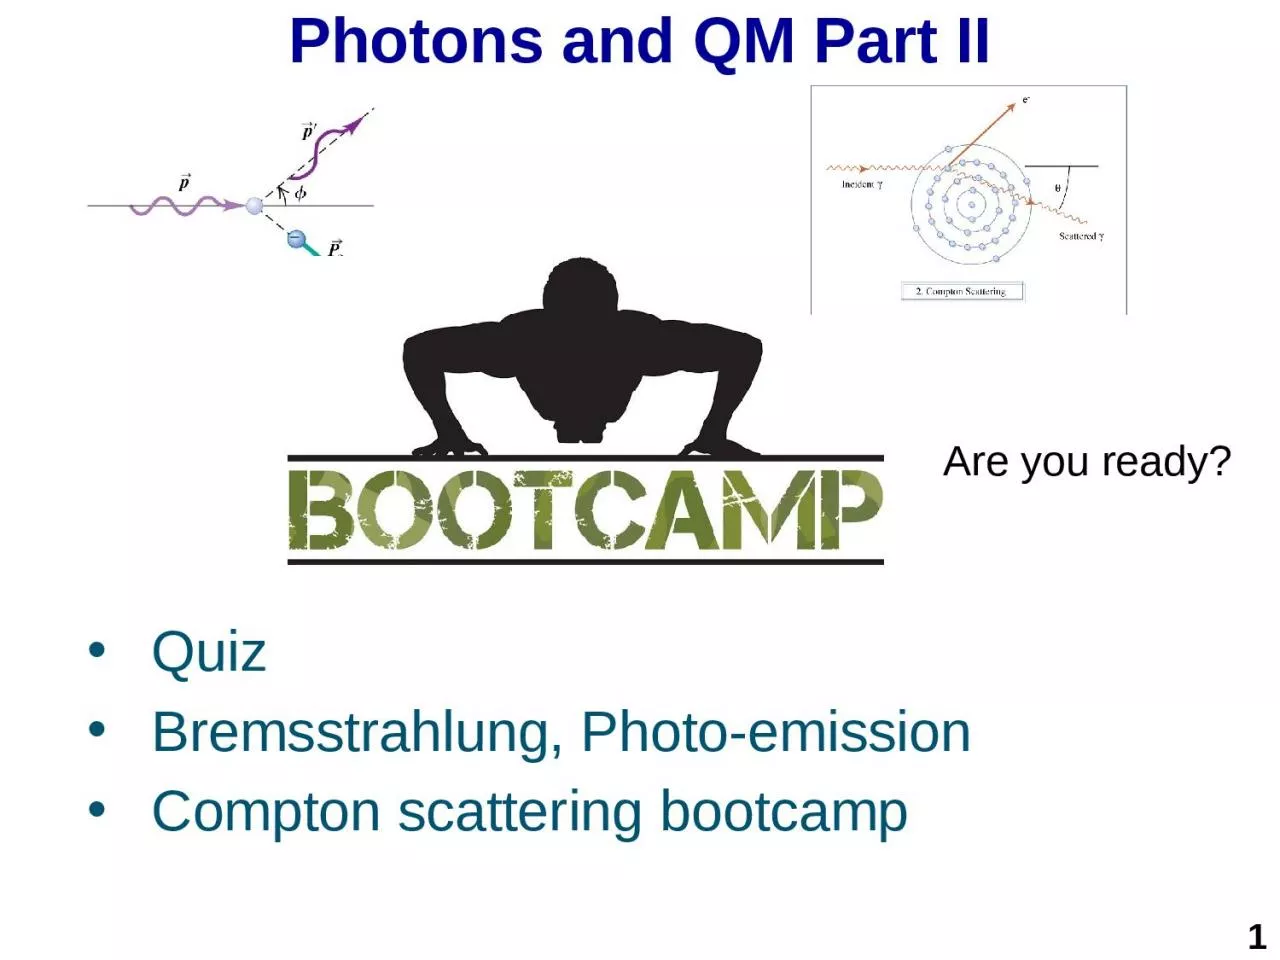 Photons and QM Part II Quiz